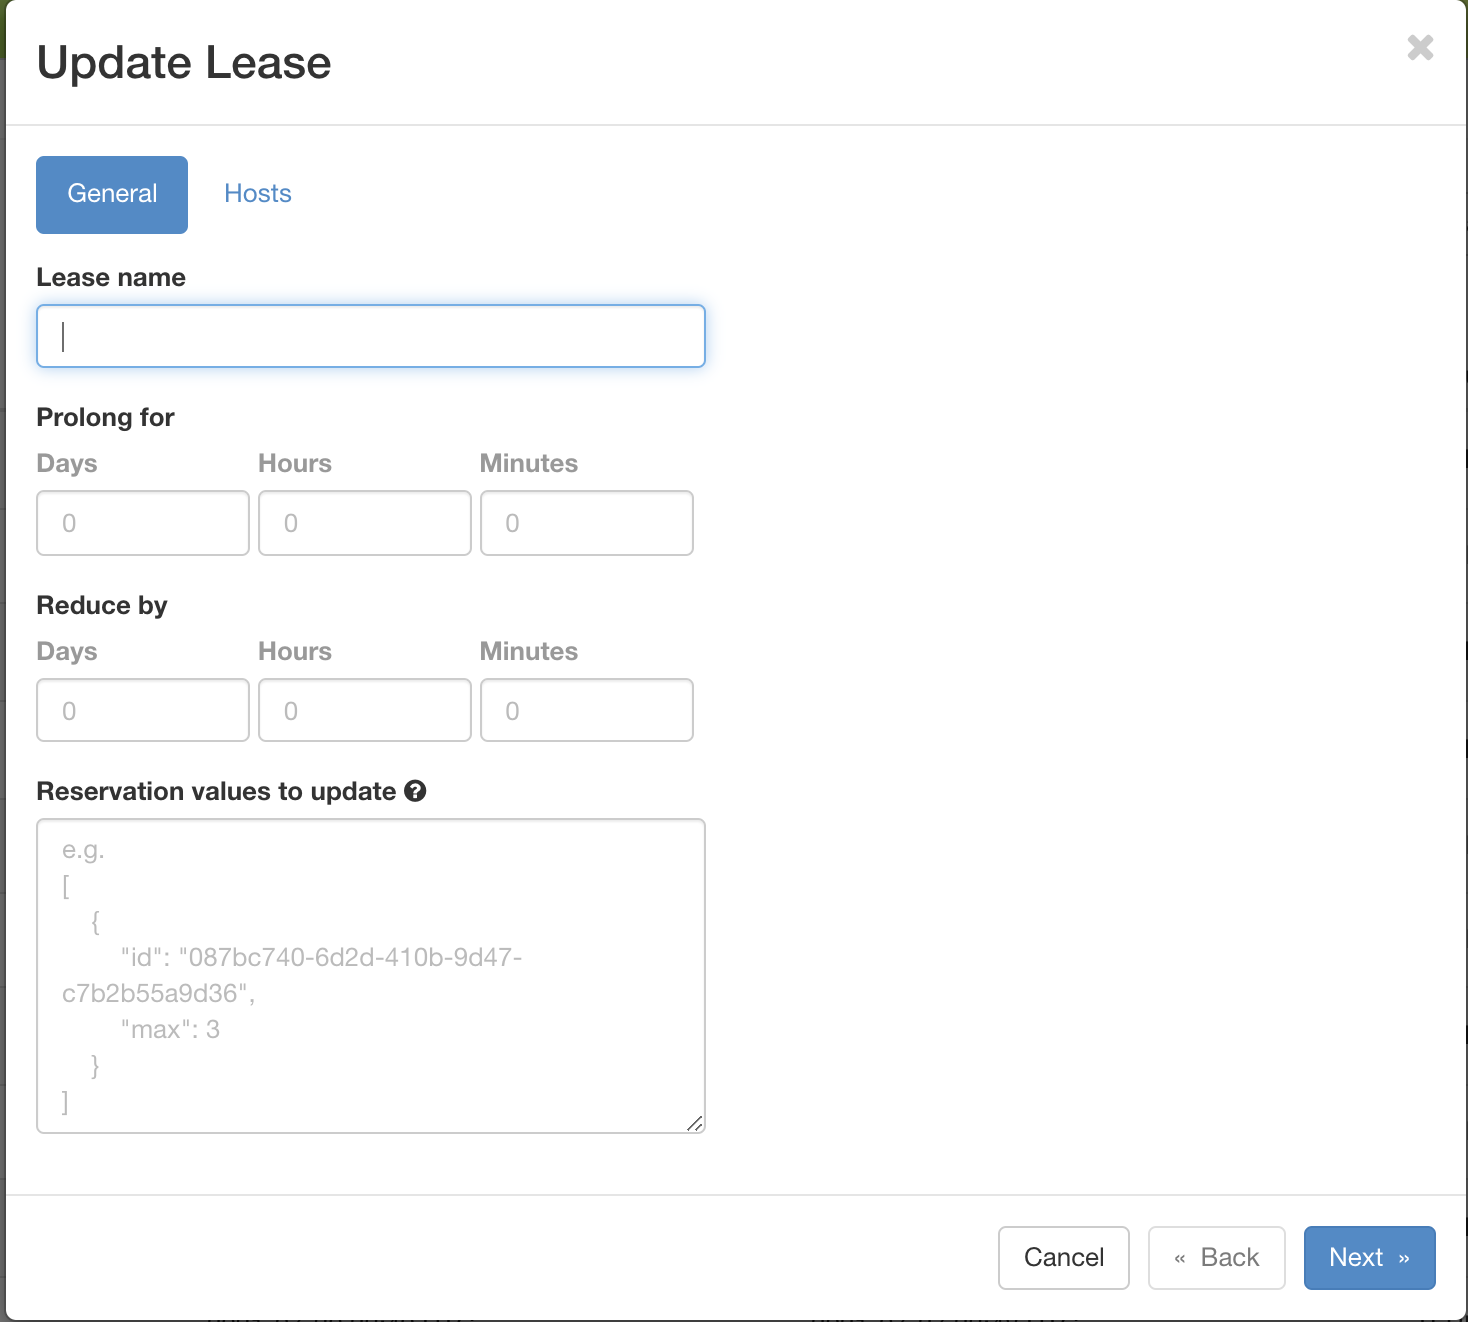 The Update Lease Parameters dialog